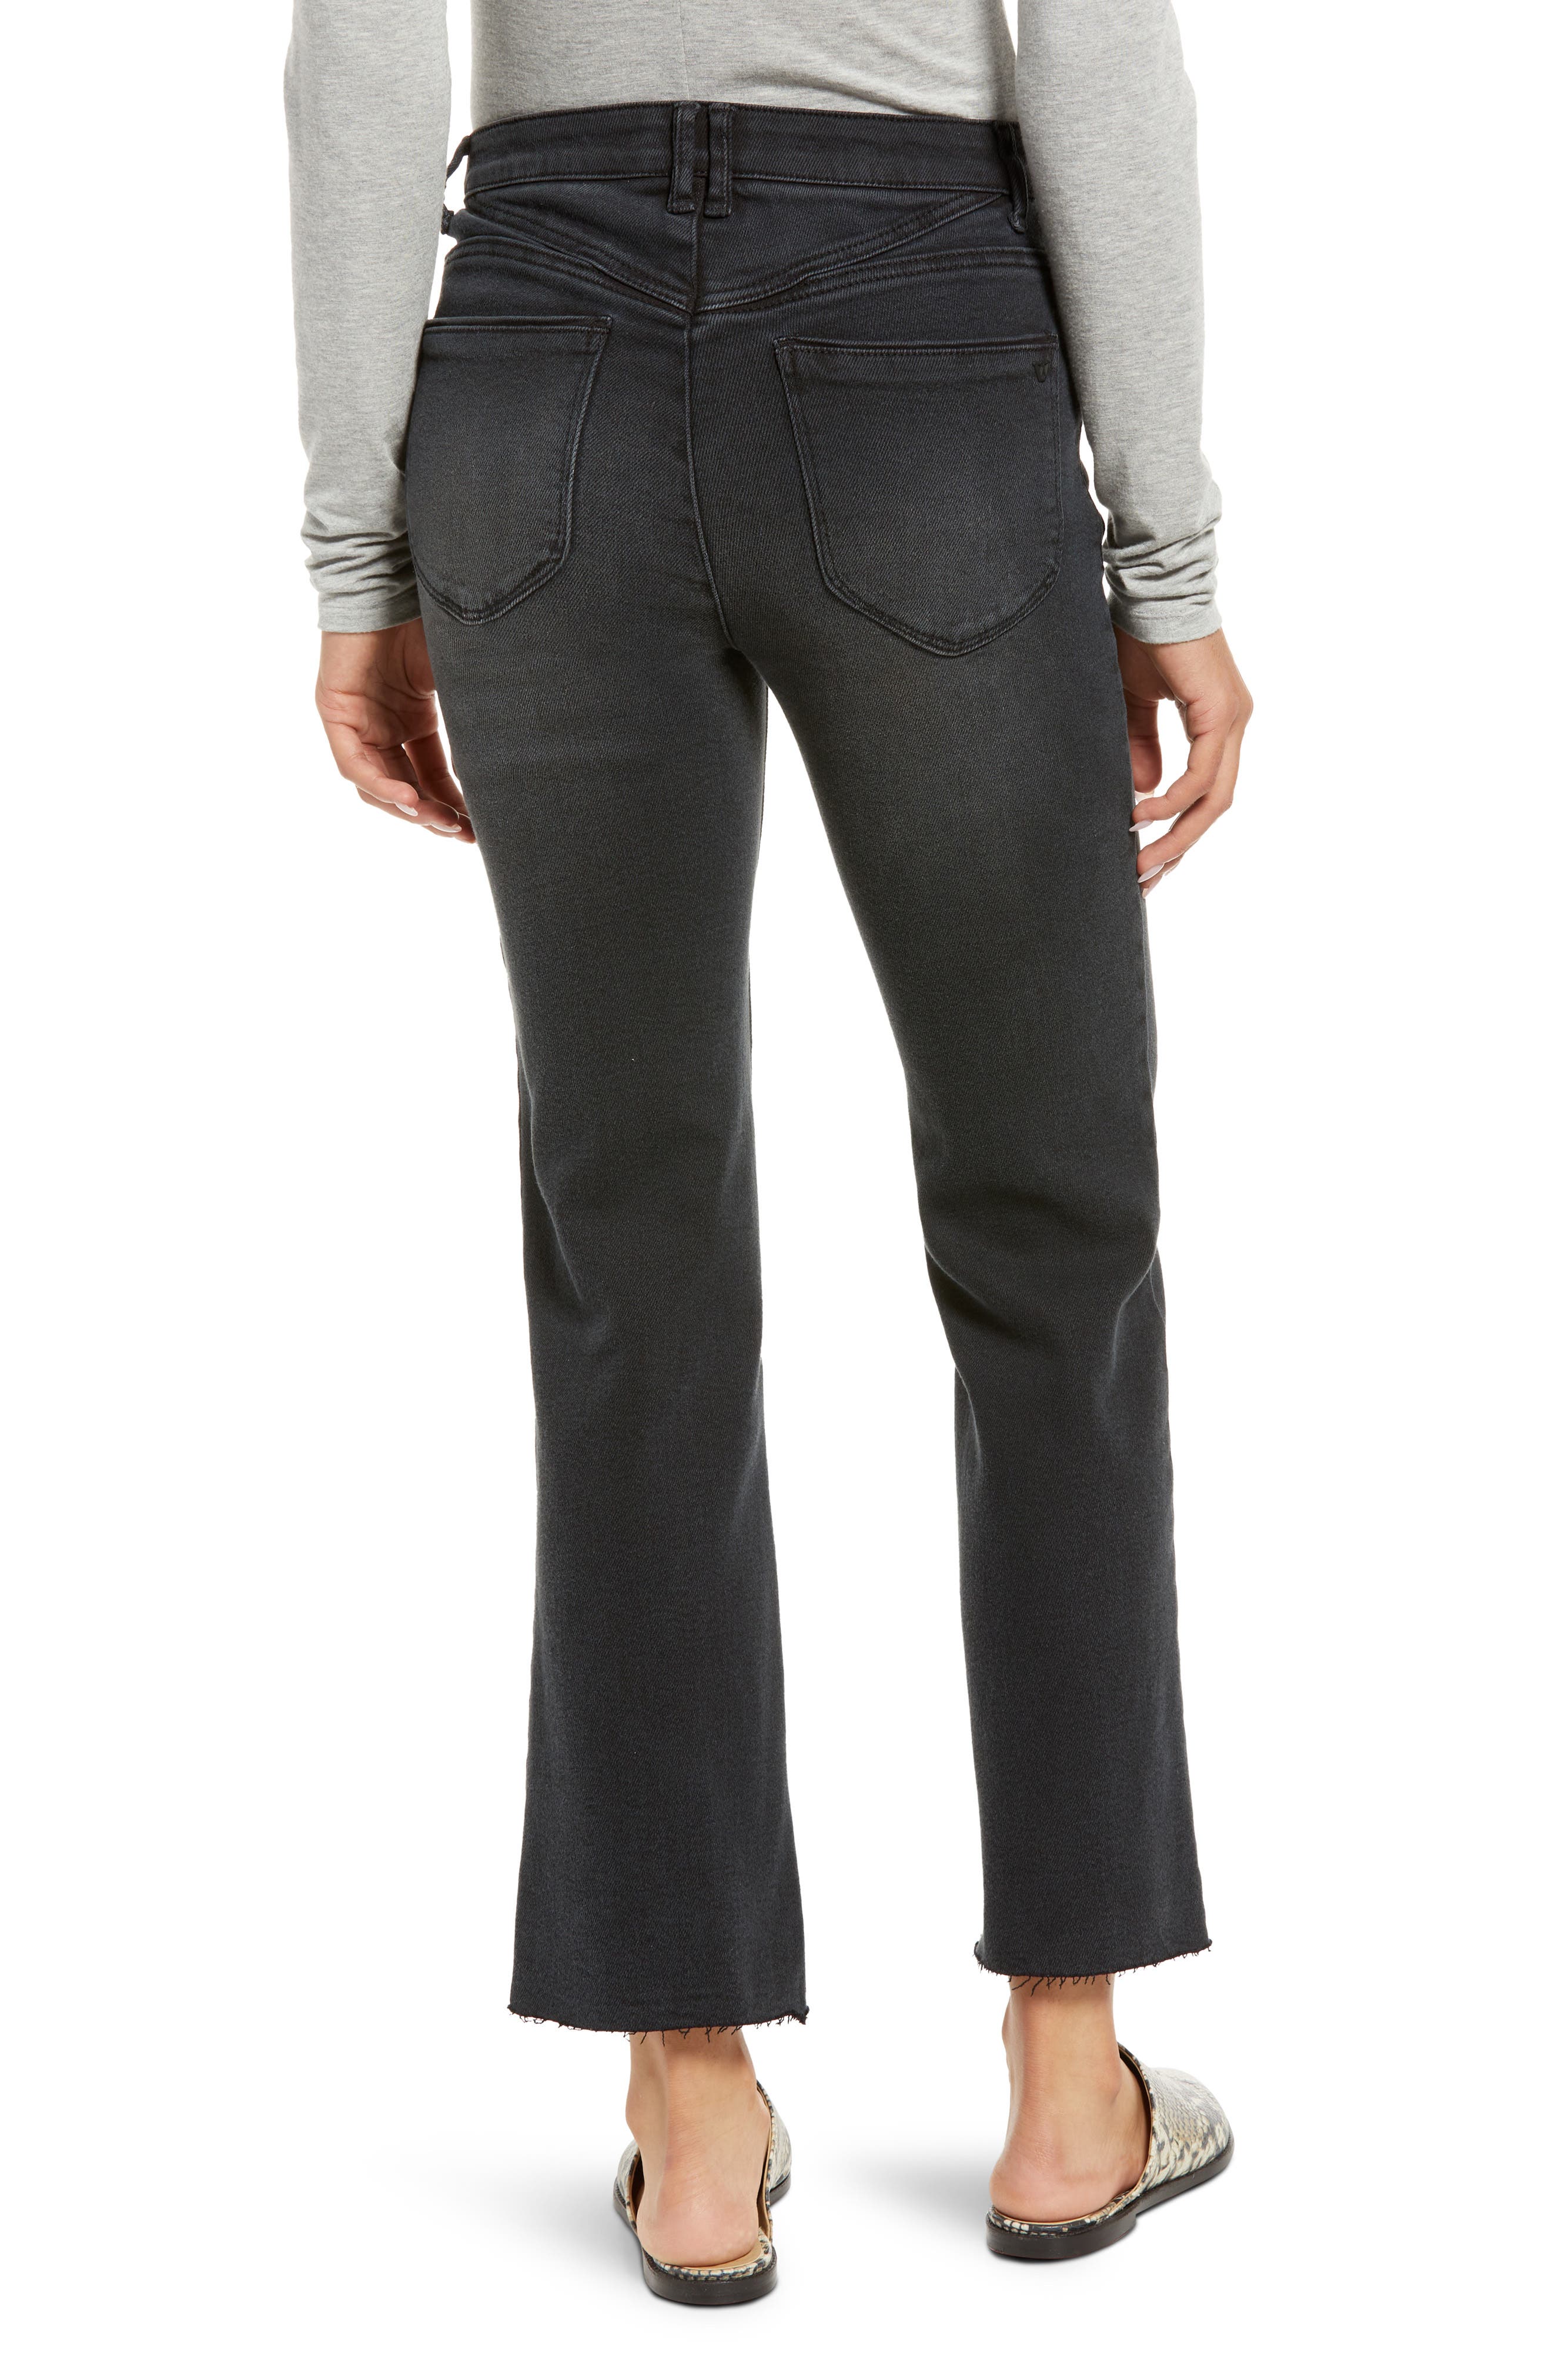 Wit & Wisdom 'ab'solution Itty Bitty High Waist Bootcut Pants in